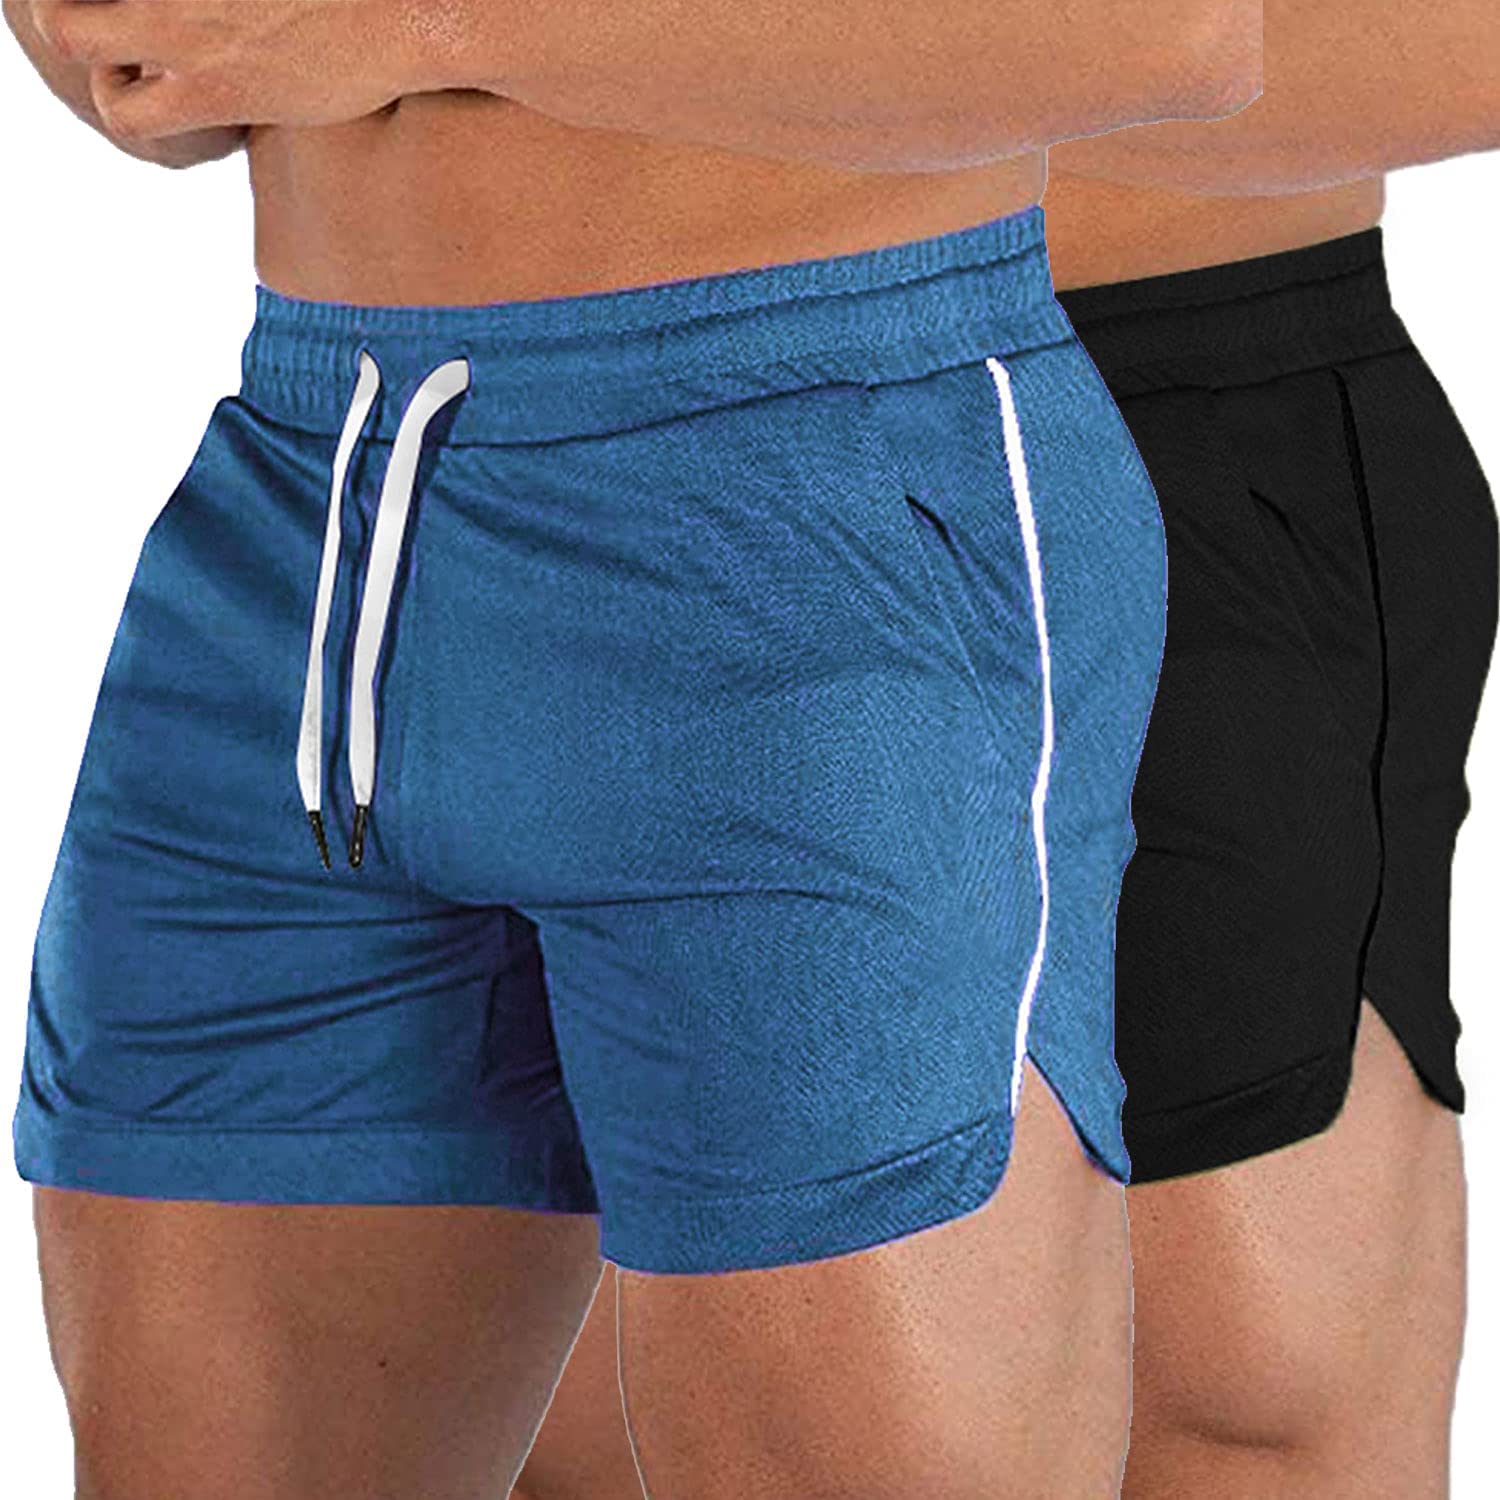 EVERWORTH Men's Running Gym Shorts Lightweight Workout Short Fitted Quick Dry Swim Trunks Shorts with Zipper Pockets 